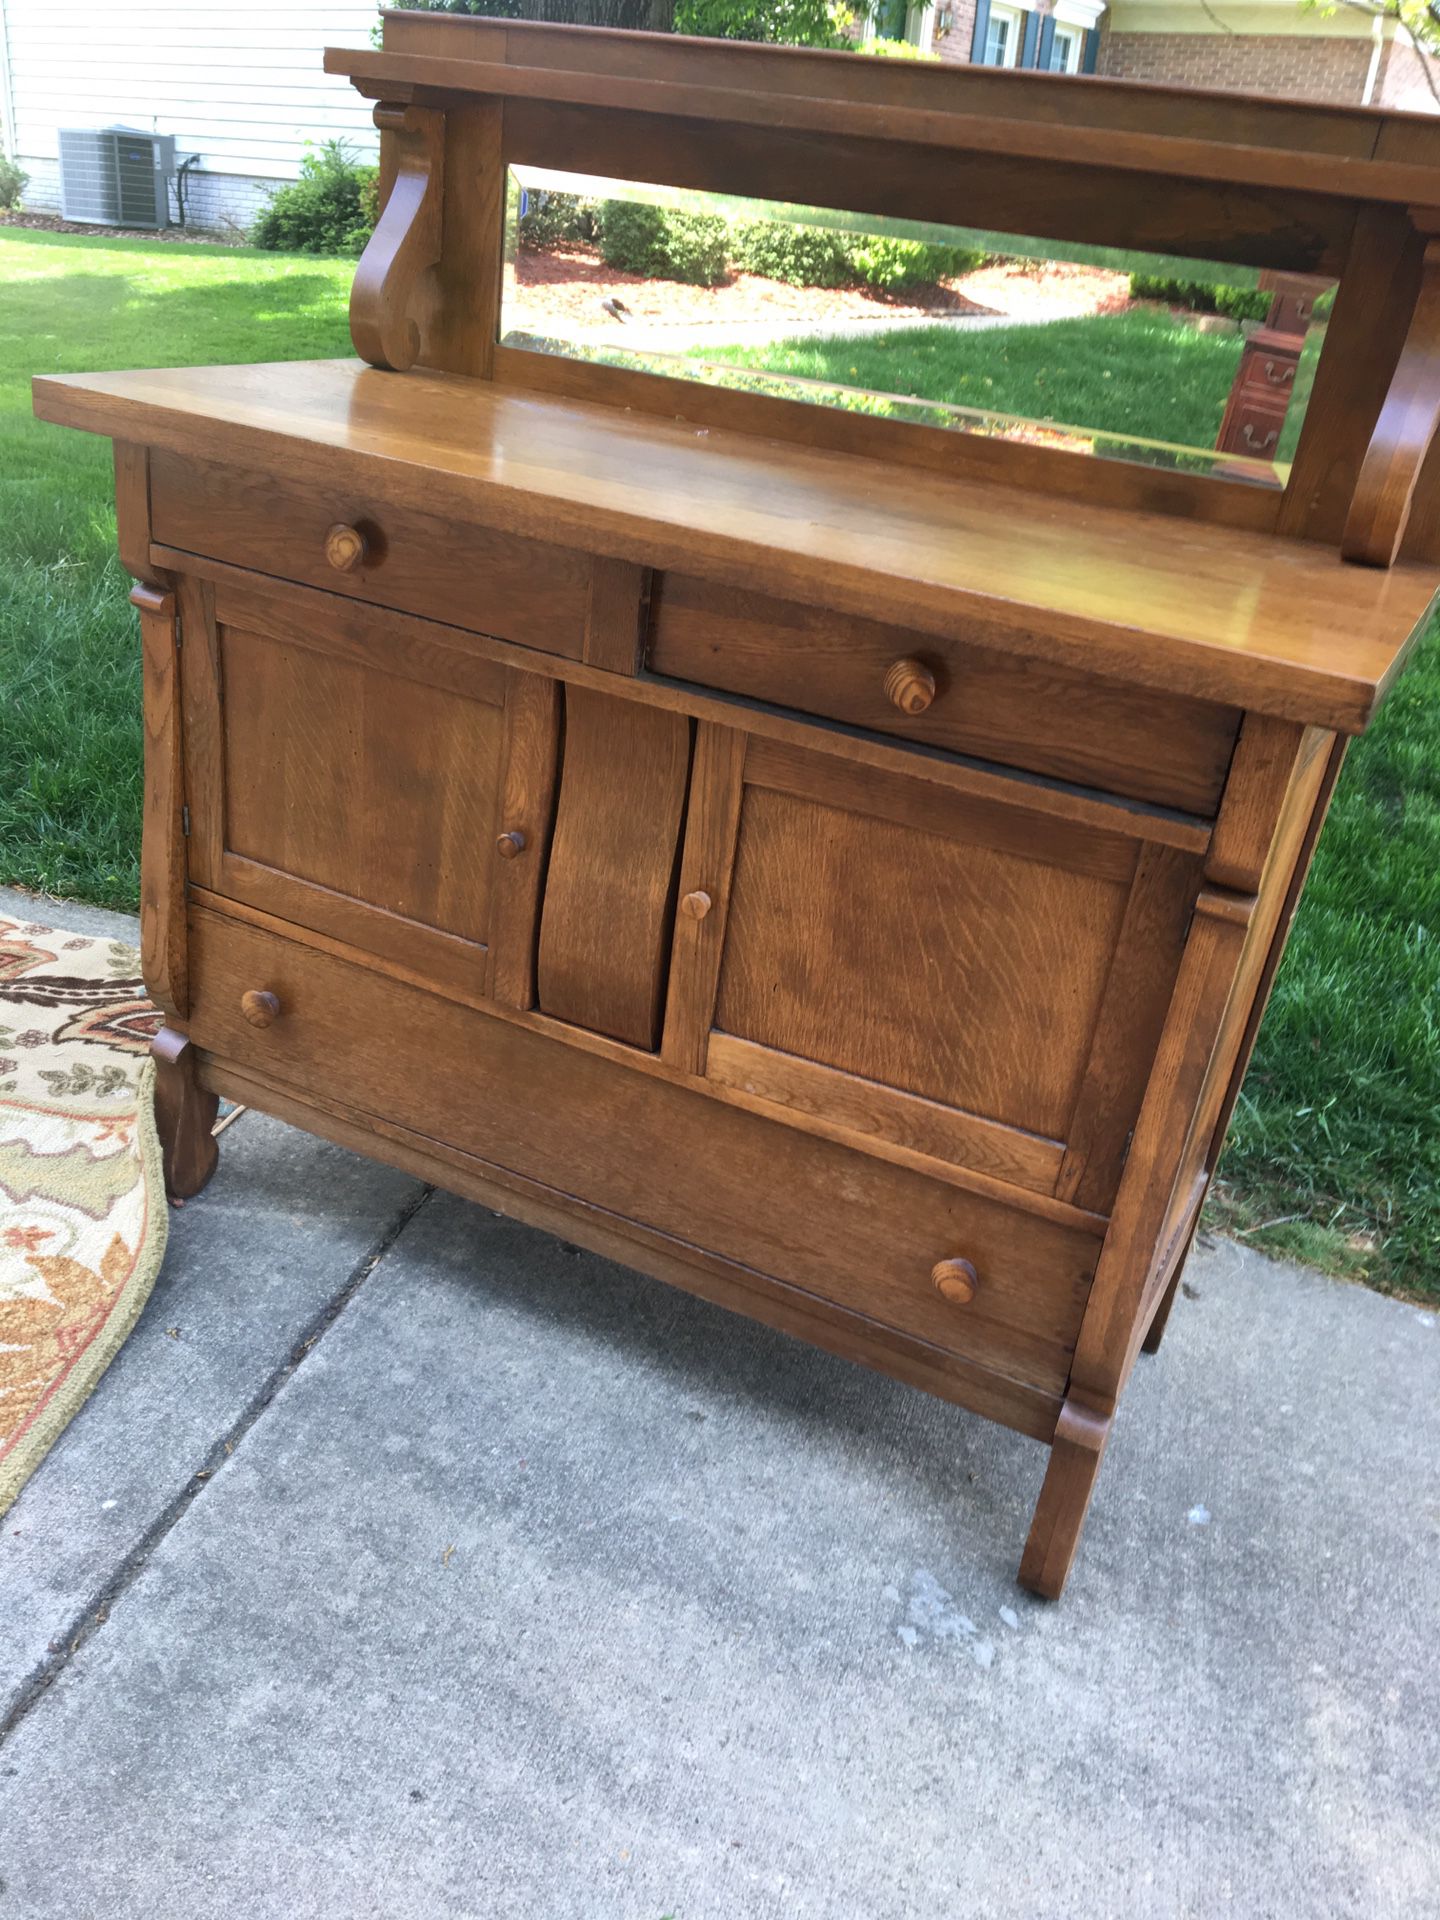 Antique buffet/sideboard with beveled glass mirror